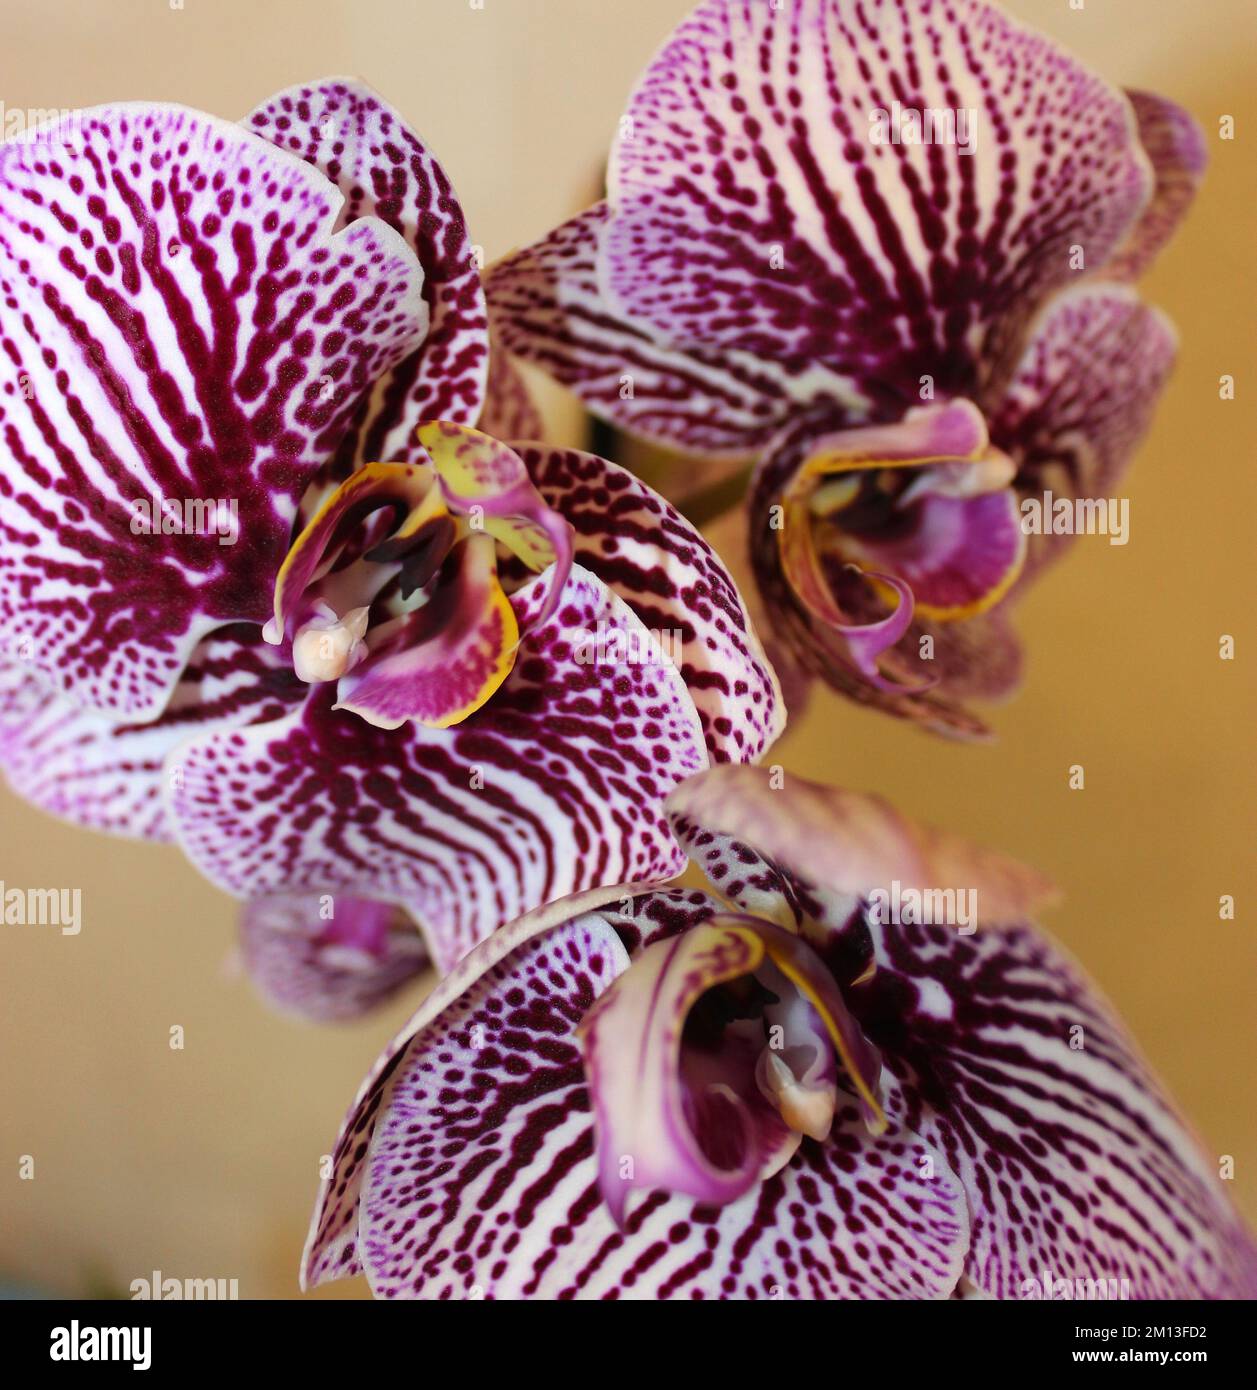 Selectively Breeding Phalaenopsis Orchid With Violet Stripes On A Petals Closeup Stock Photo Stock Photo